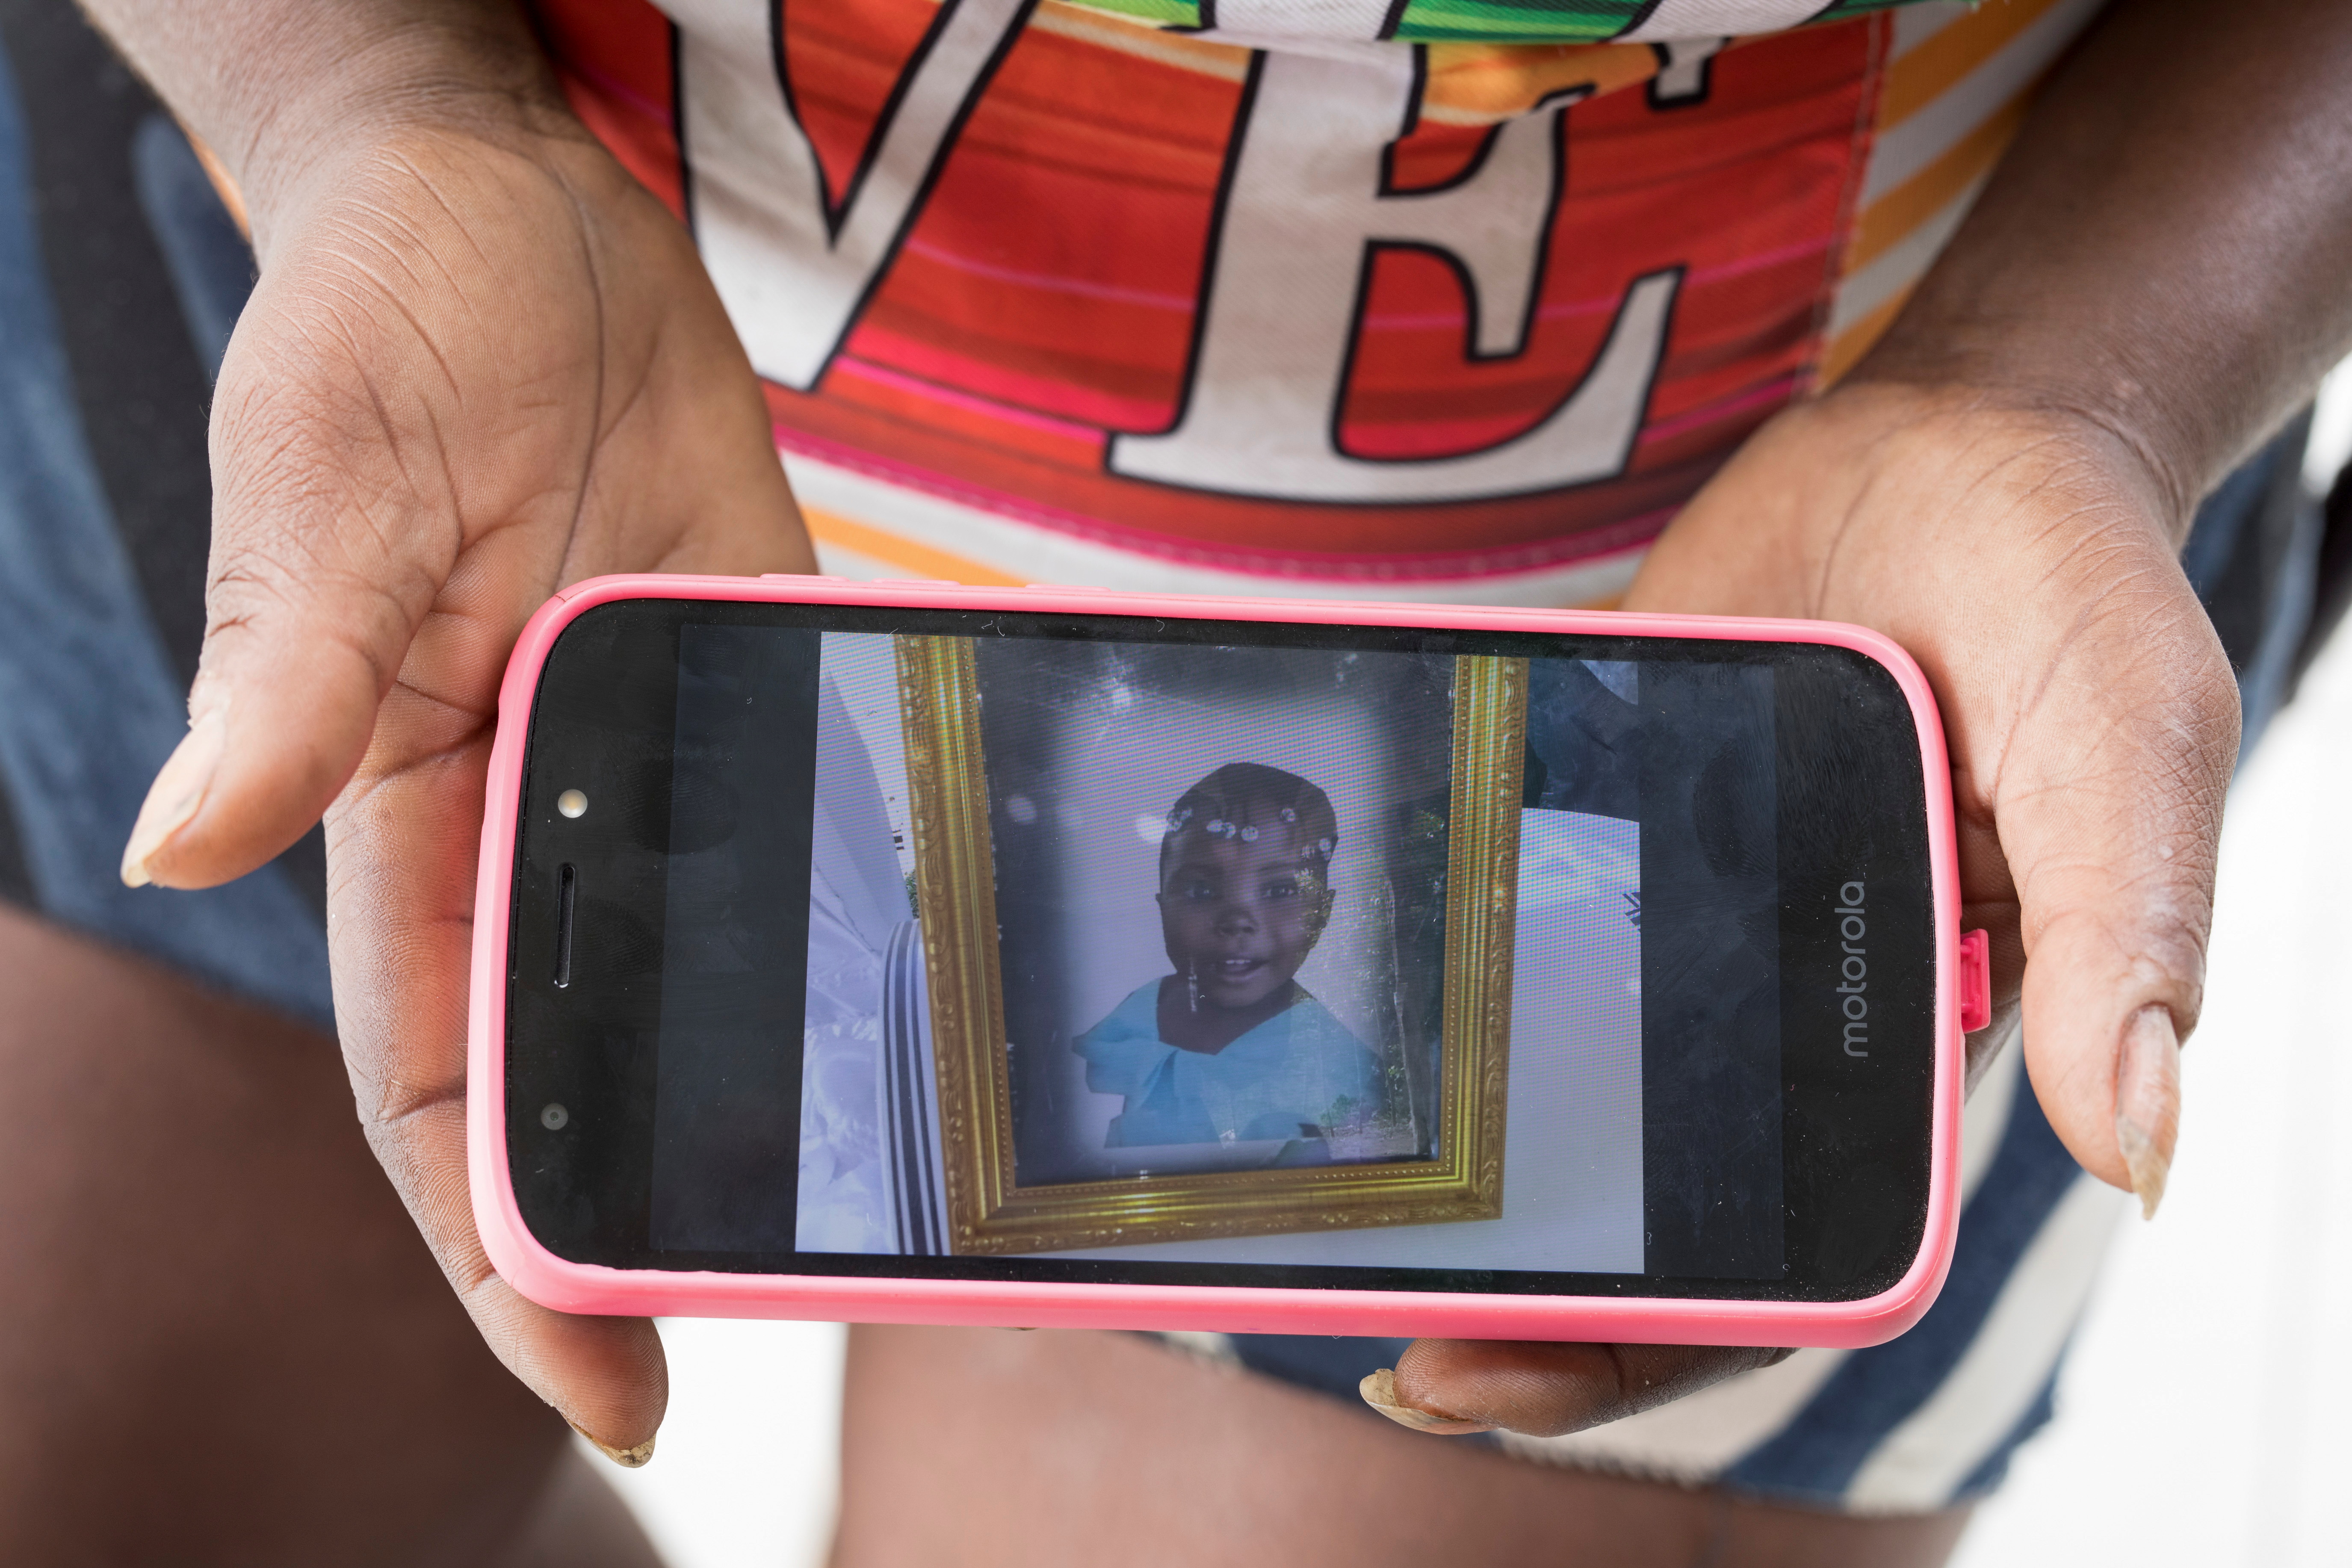 No one is safe: kidnappings terrorize Haiti